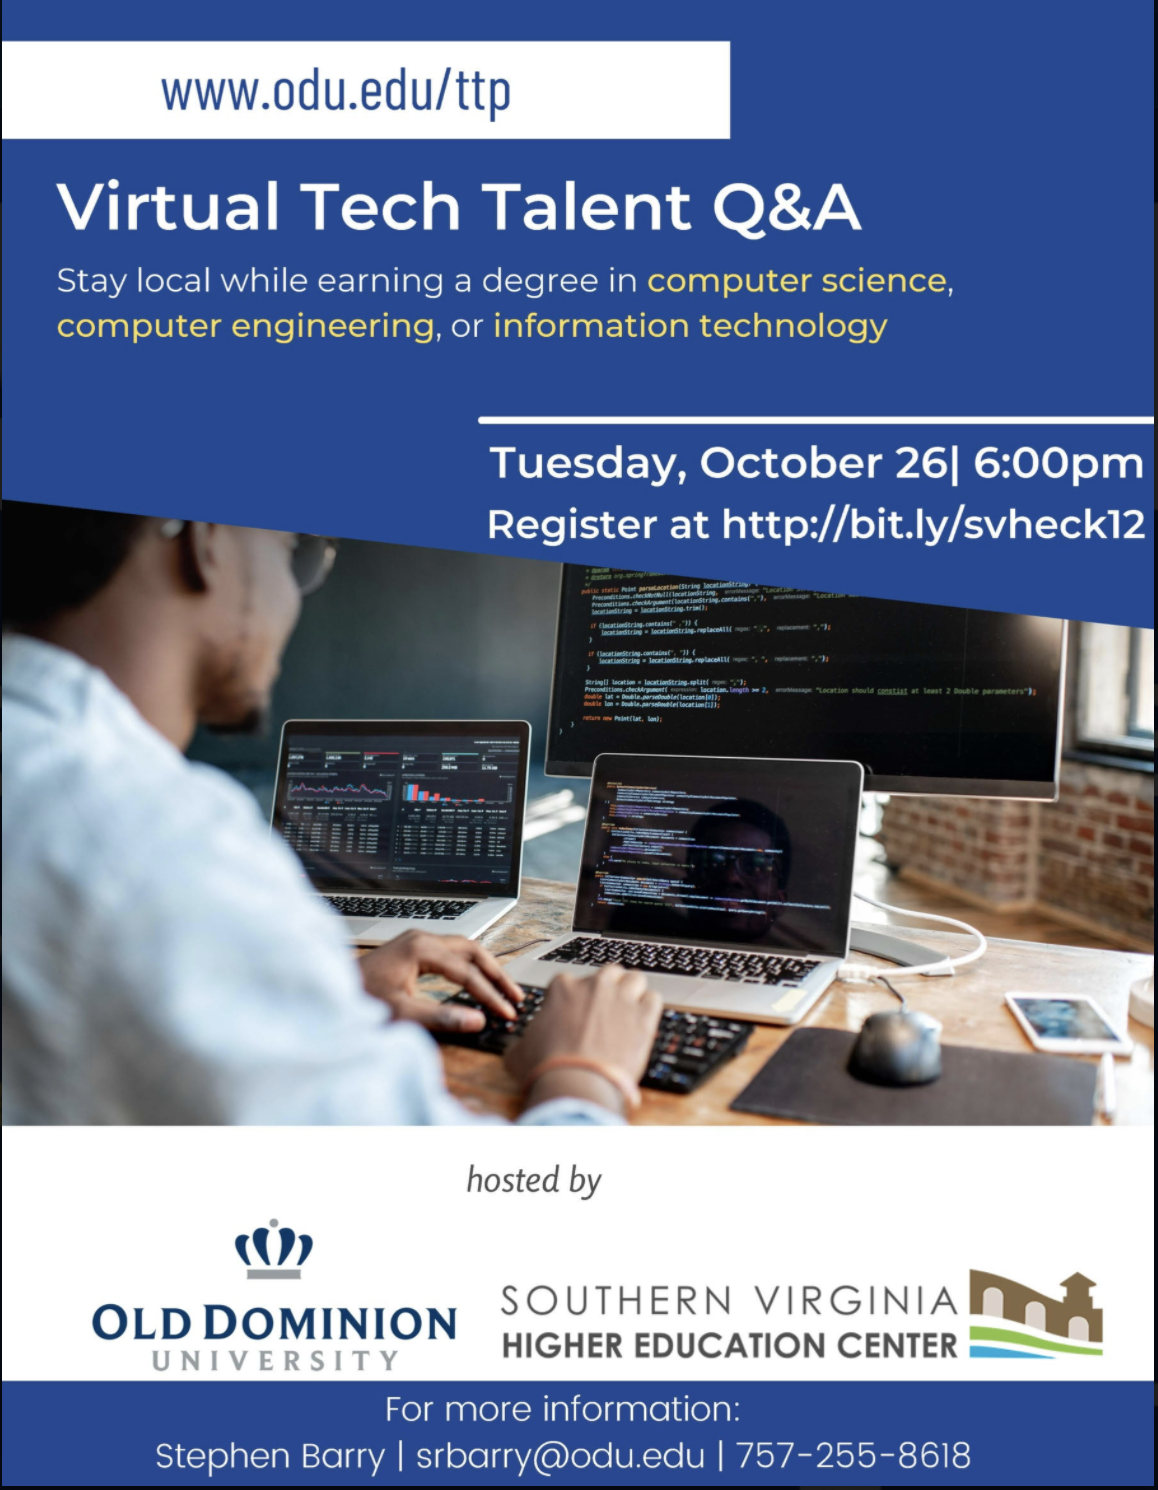 Old Dominion University (ODU) and the Southern Virginia Higher Education Center (SVHEC) are teaming up to help individuals across the region access tech careers.